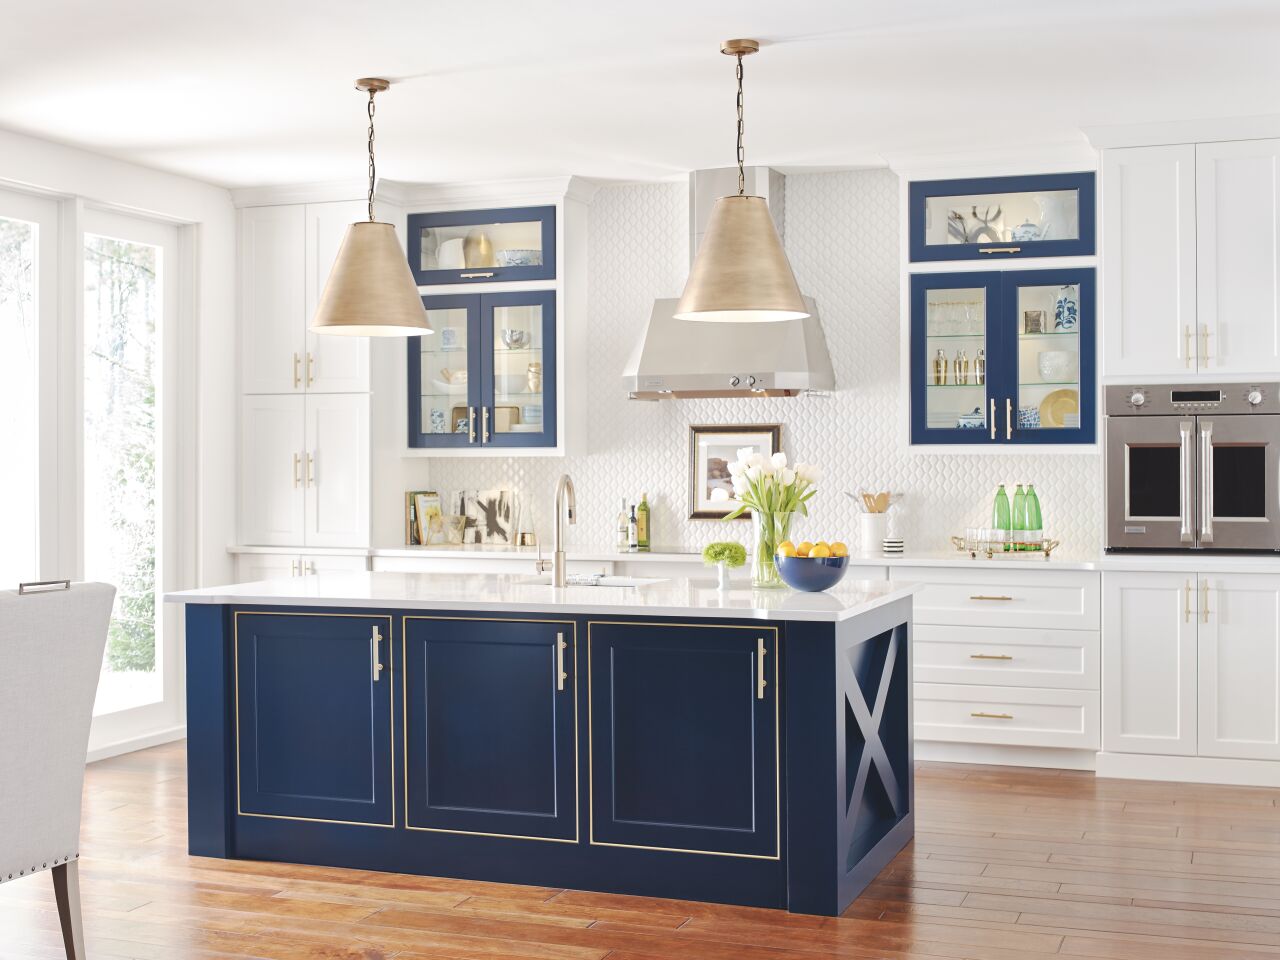 “Pantone’s 2020 Color of the Year, Classic Blue, embodies a casual sophistication that compliments a wide array of other colors, making it a harmonious tone. Masterbrand Cabinets has seen blue kitchen accents making waves in our segment of the market with finishes like Maritime, Naval and Blueberry. It’s optimistic and inviting and pairs naturally with shades of white, gray and trending wood tones. Classic Blue represents a new era that cements deep blues to be an important tool for designers and a confident choice for homeowners.” – Stephanie Pierce, director of design and trends at MasterBrand Cabinets